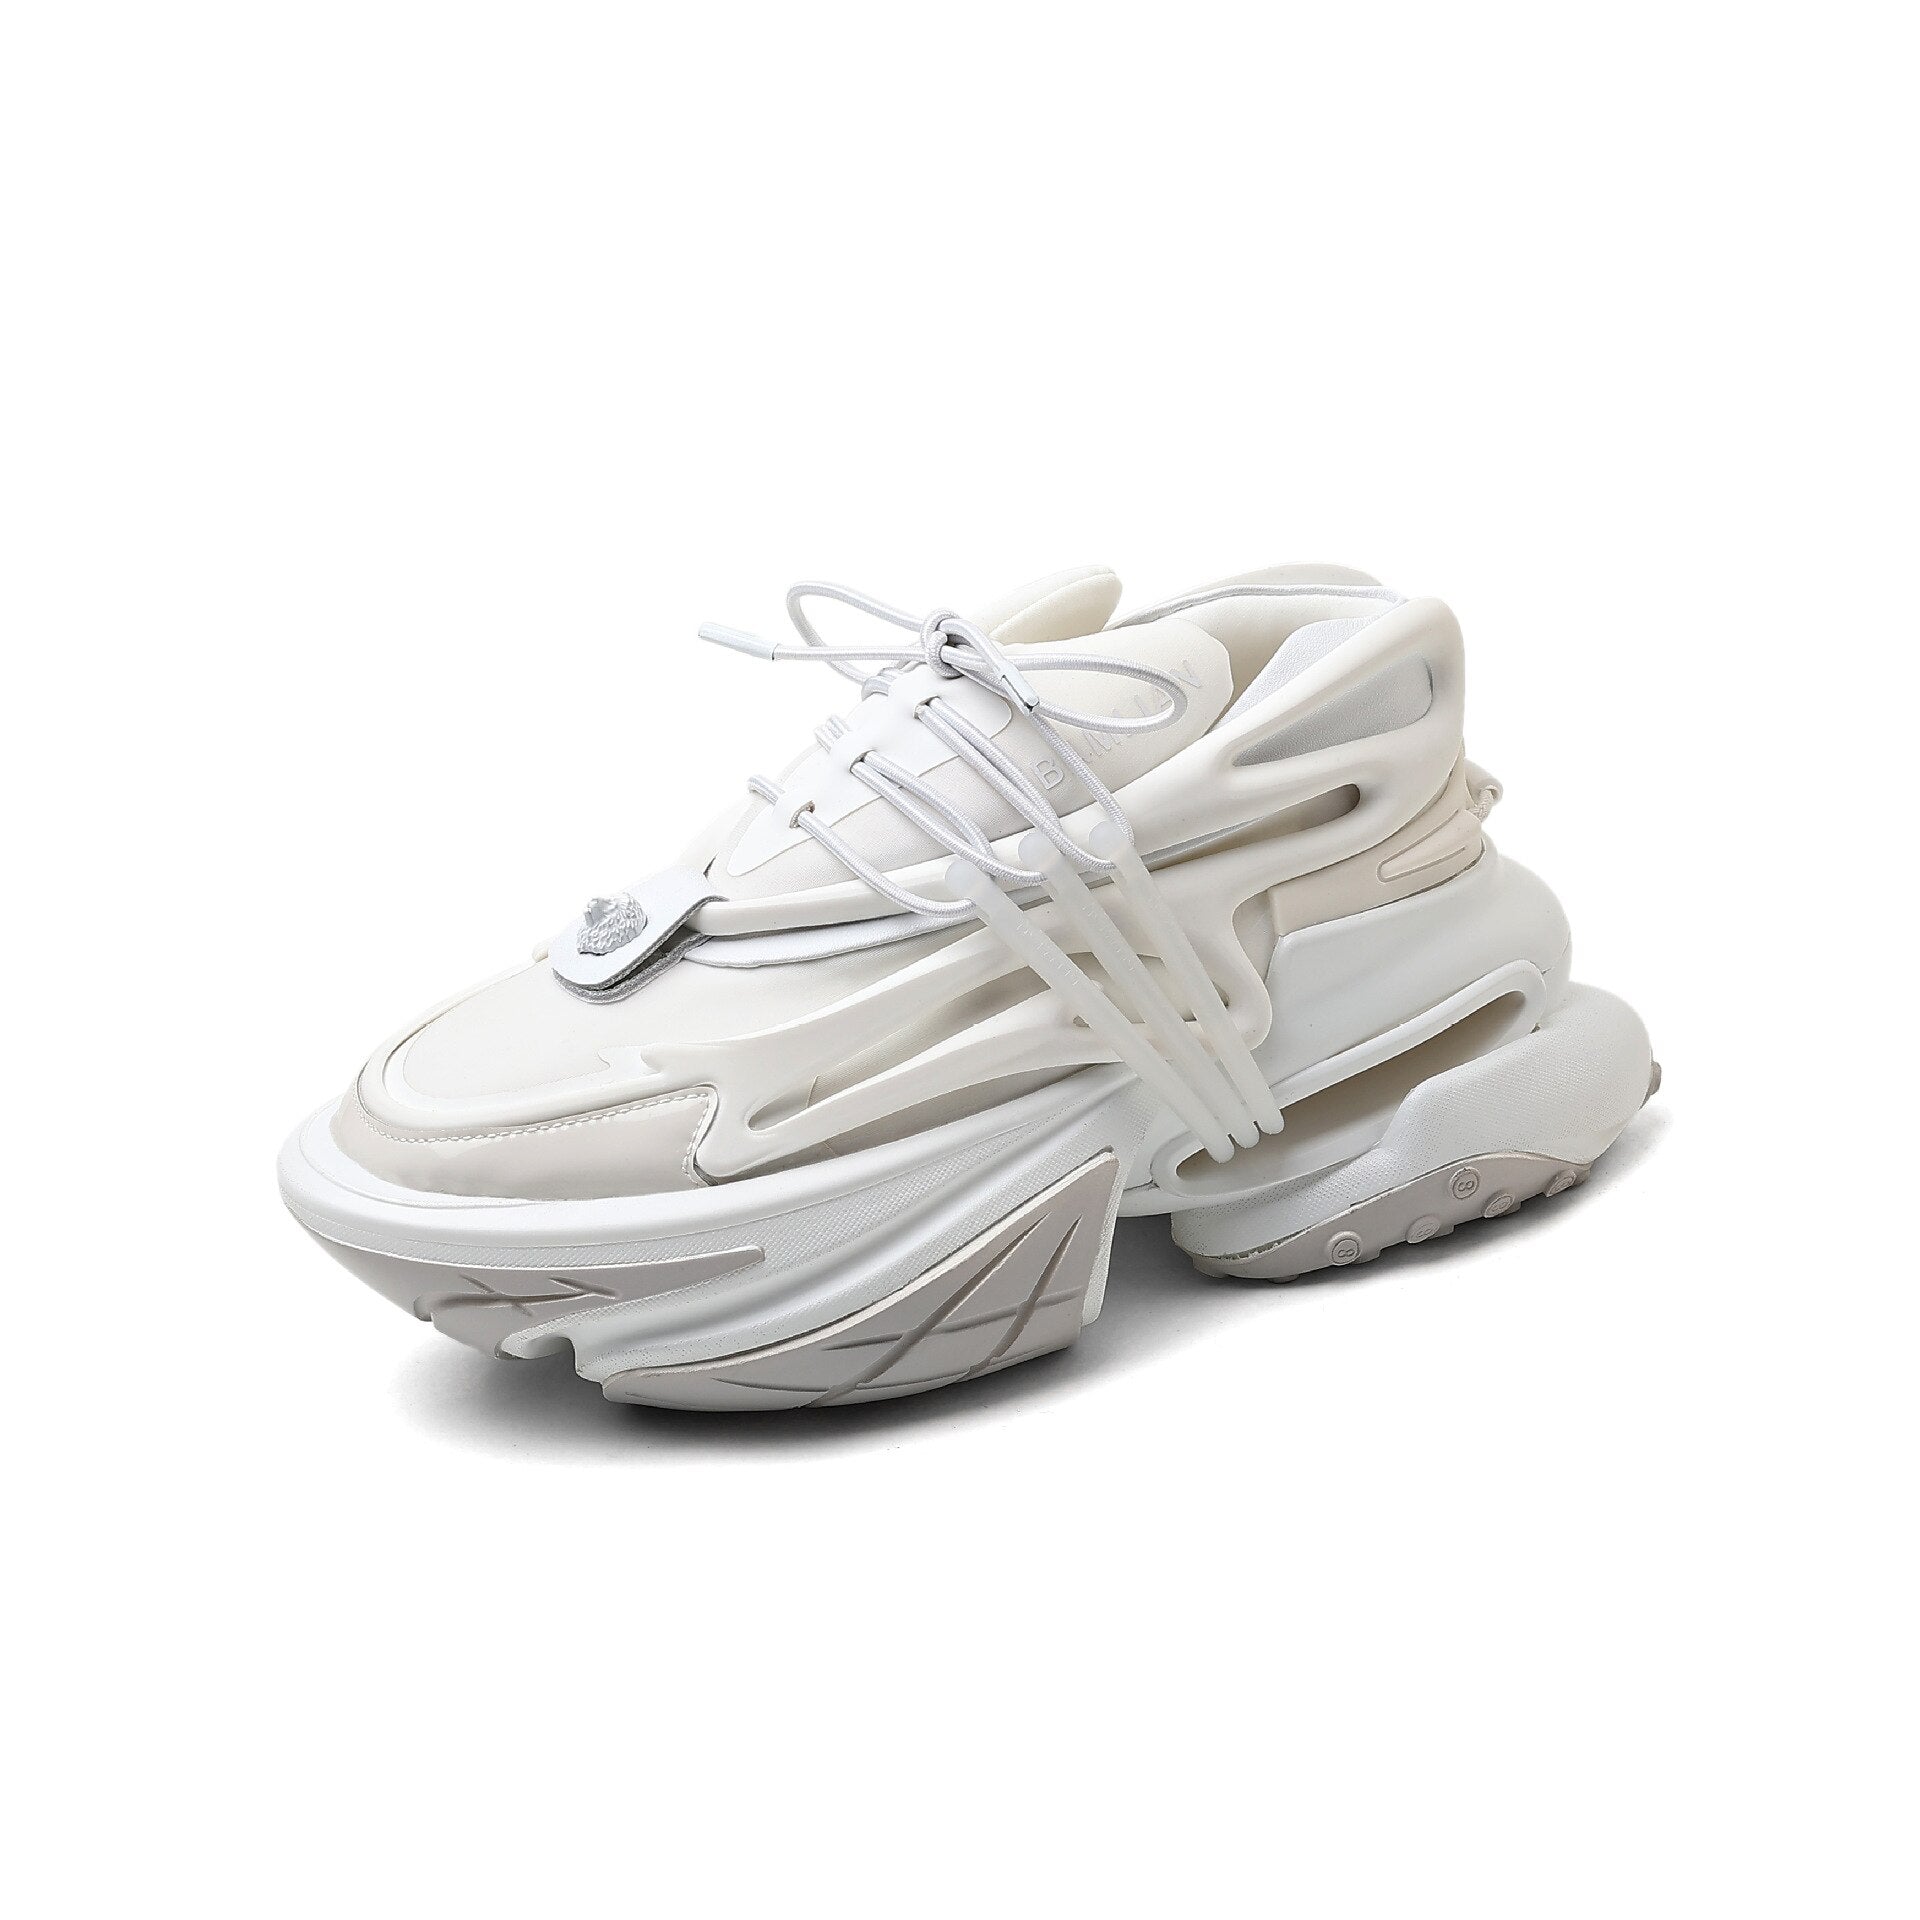 Spaceship Comfortable Airbag Shoes - White / 35